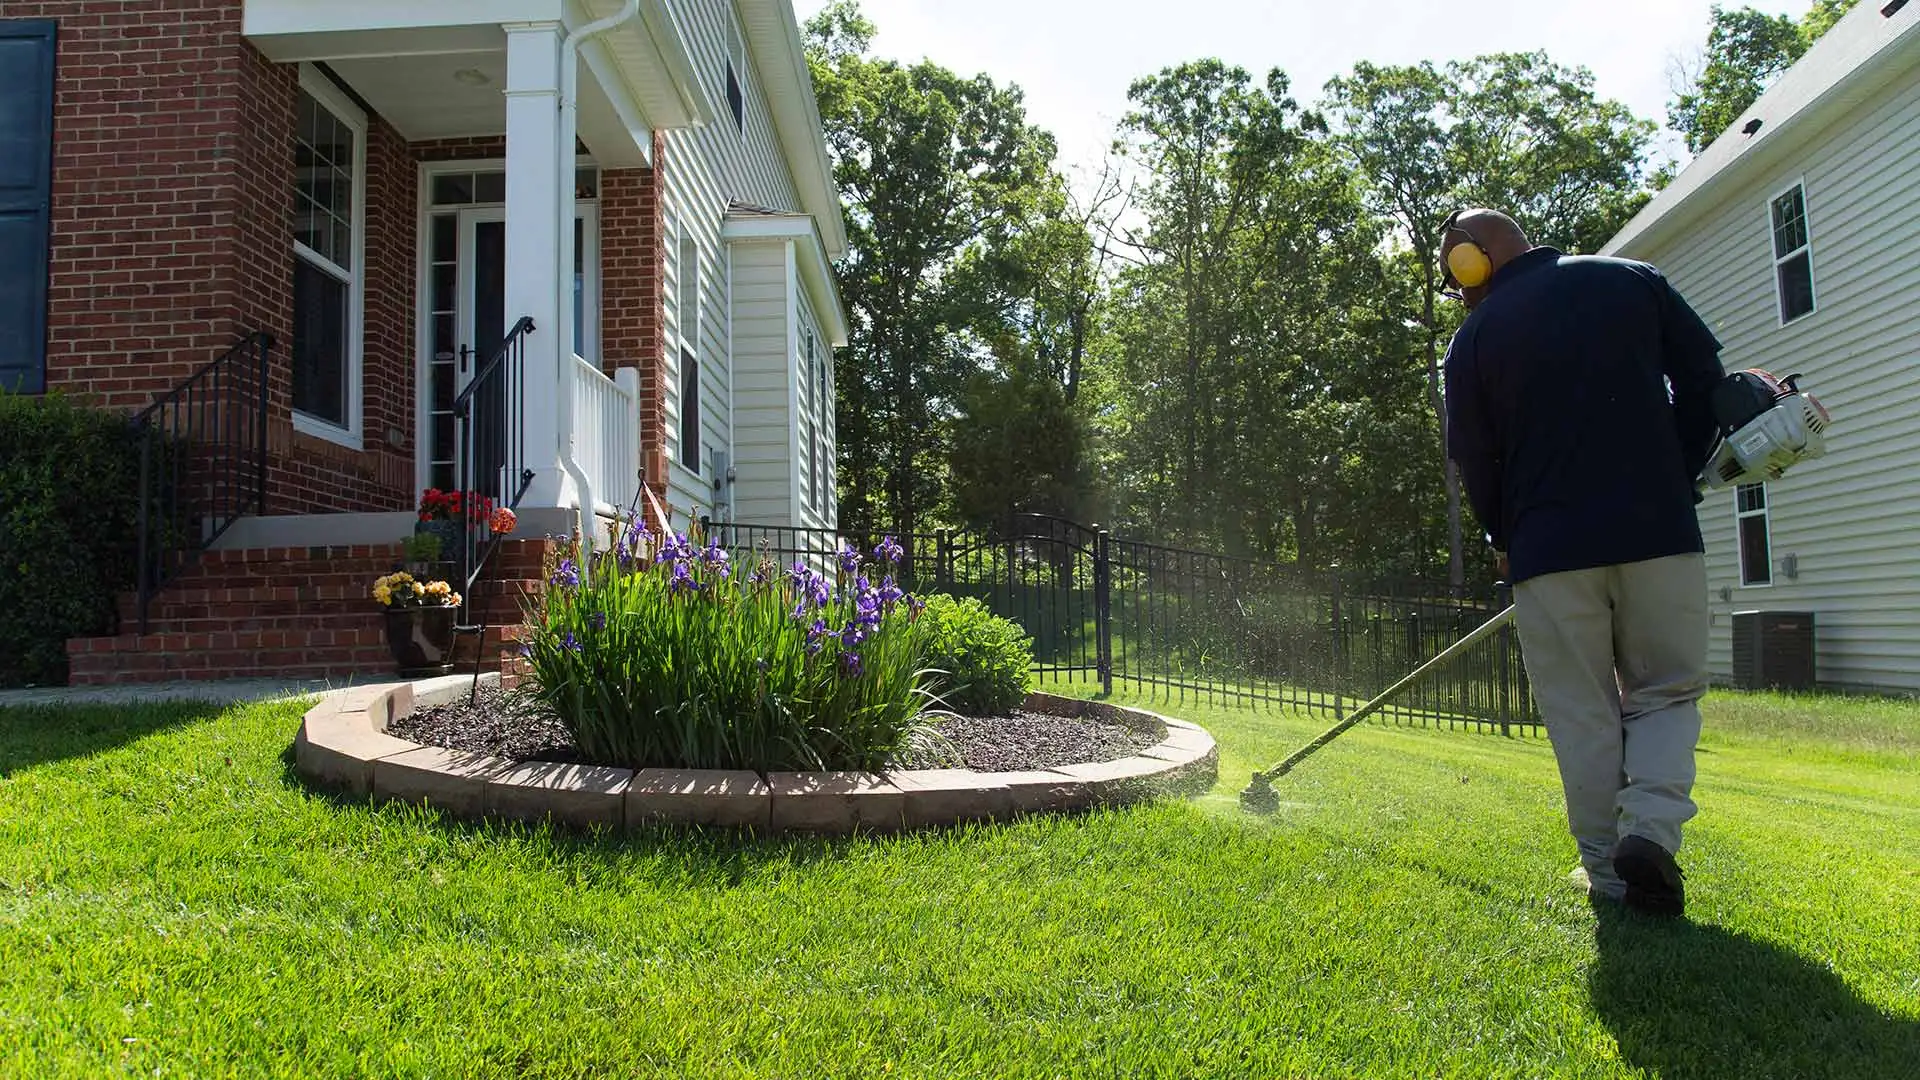 A man is weedwhacking a lawn around a paver landscape bed.